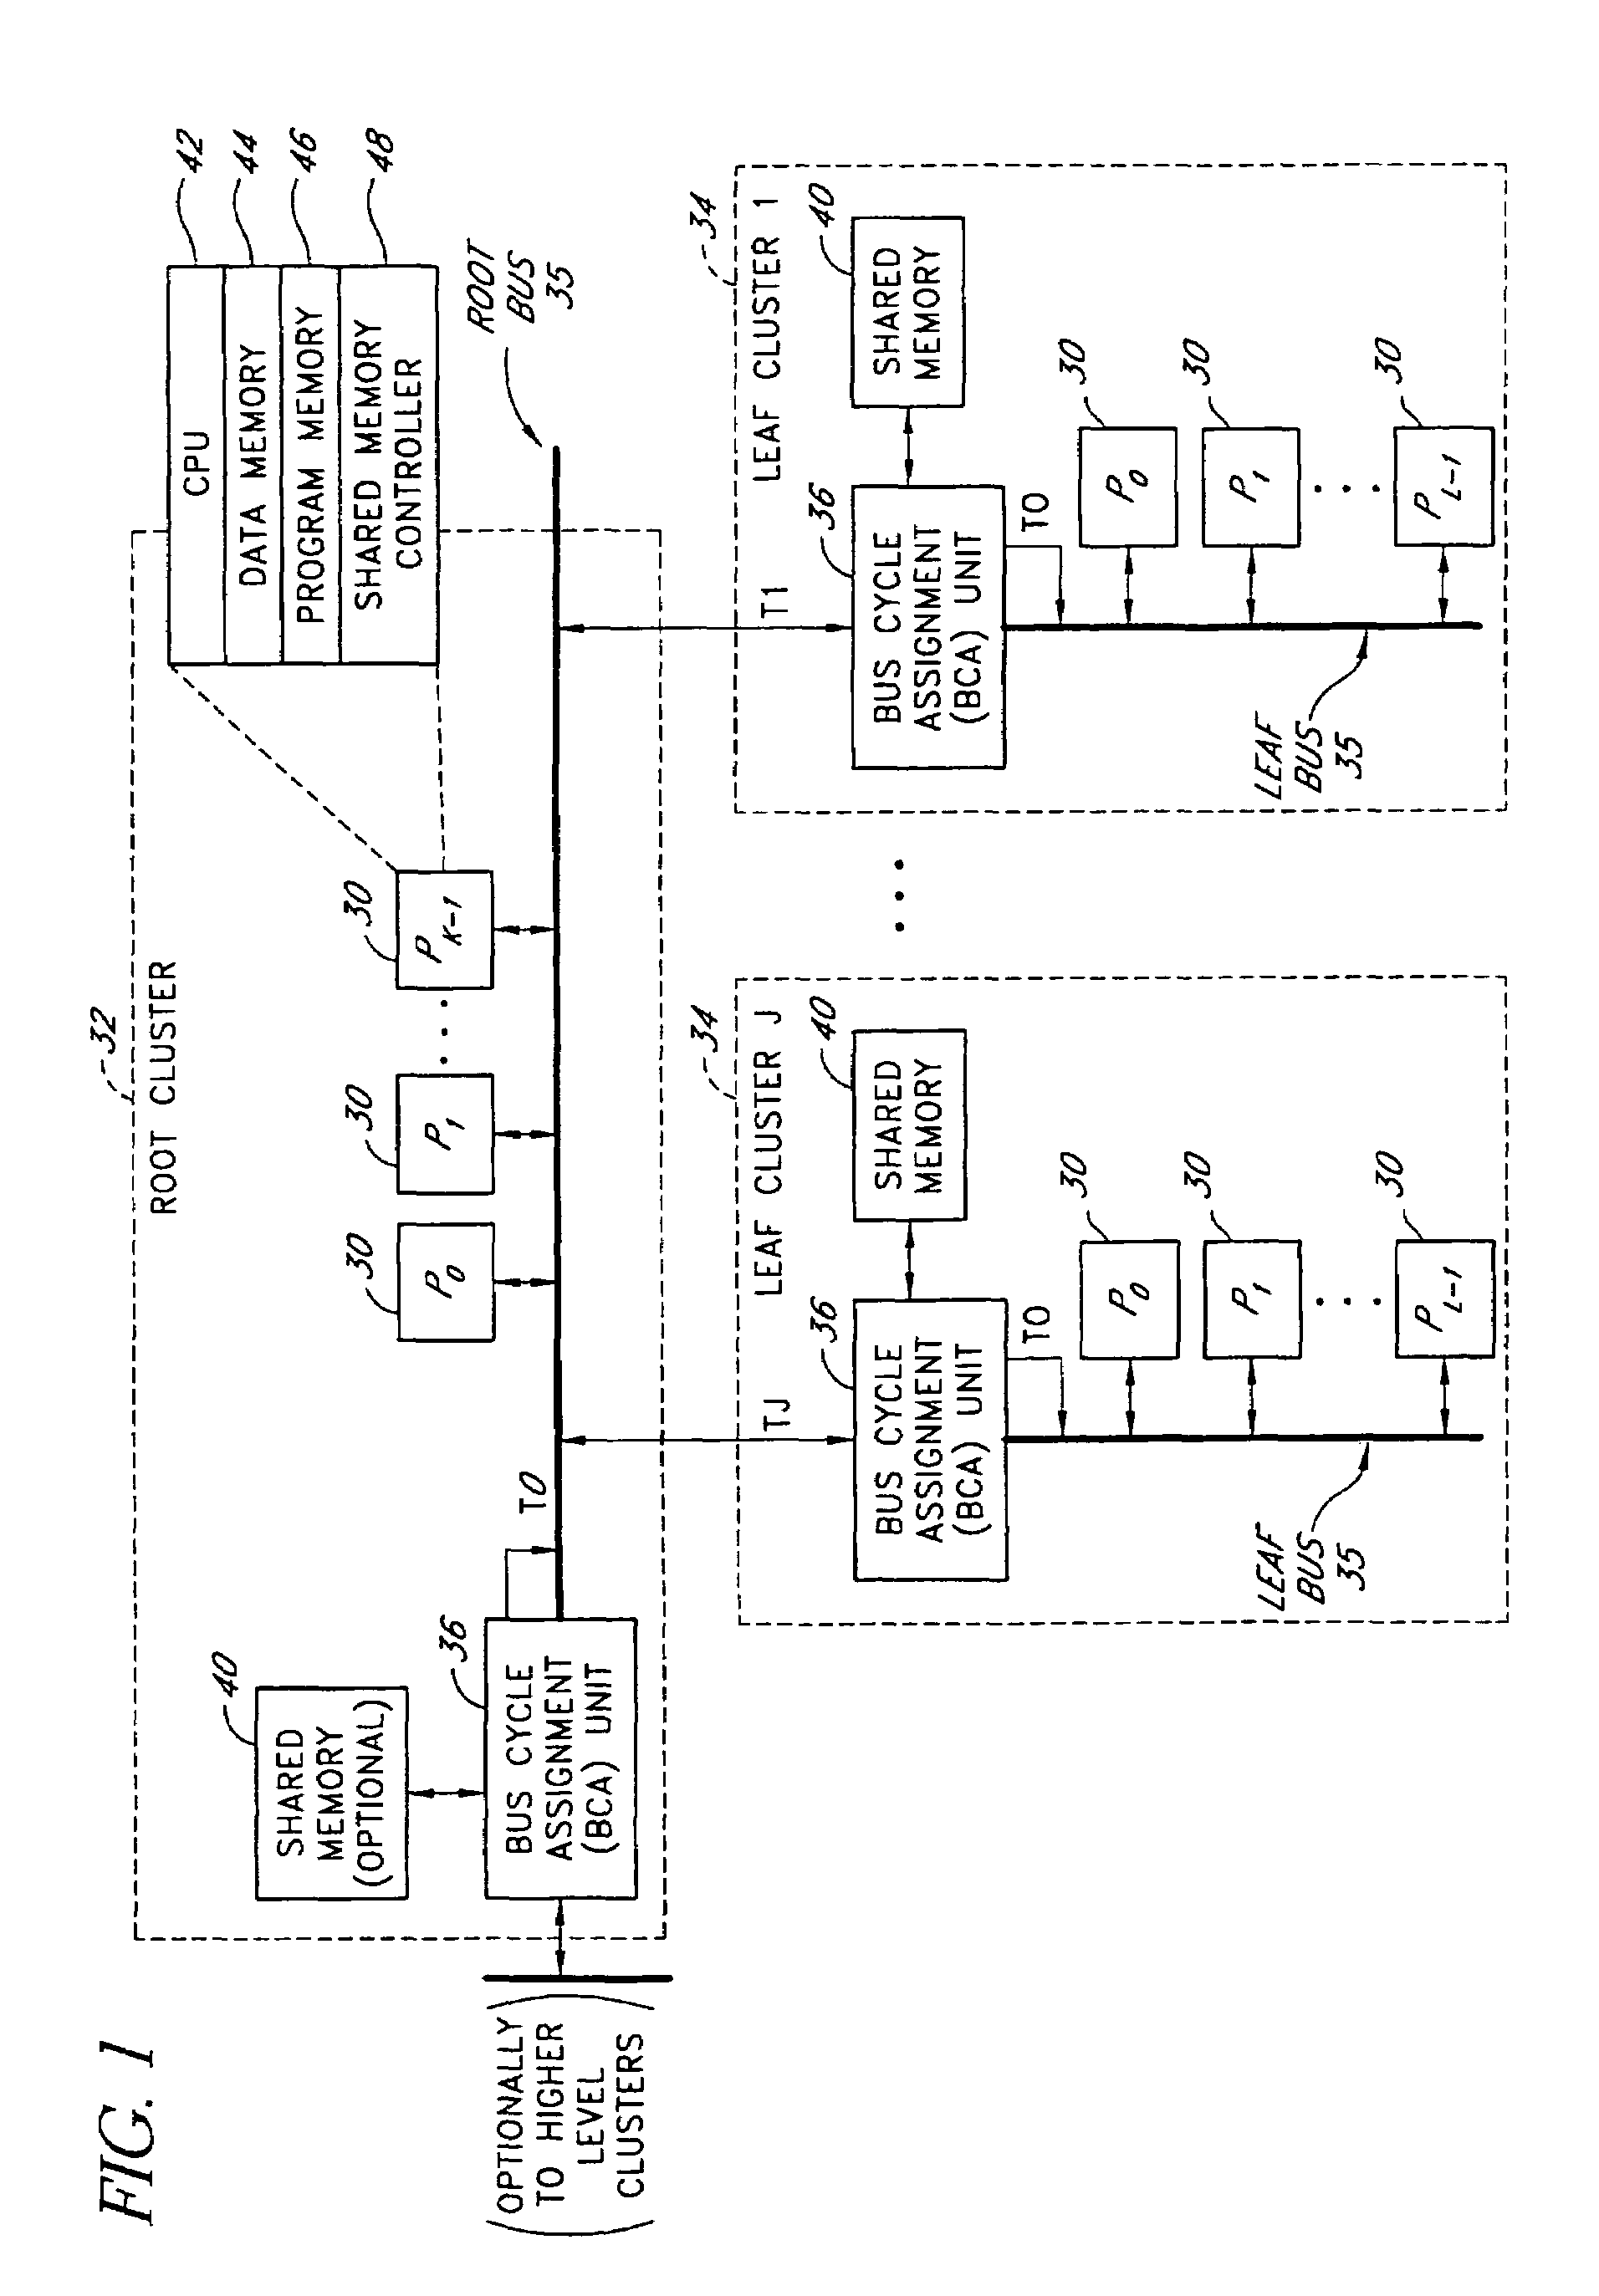 Hierarchical bus structure and memory access protocol for multiprocessor systems